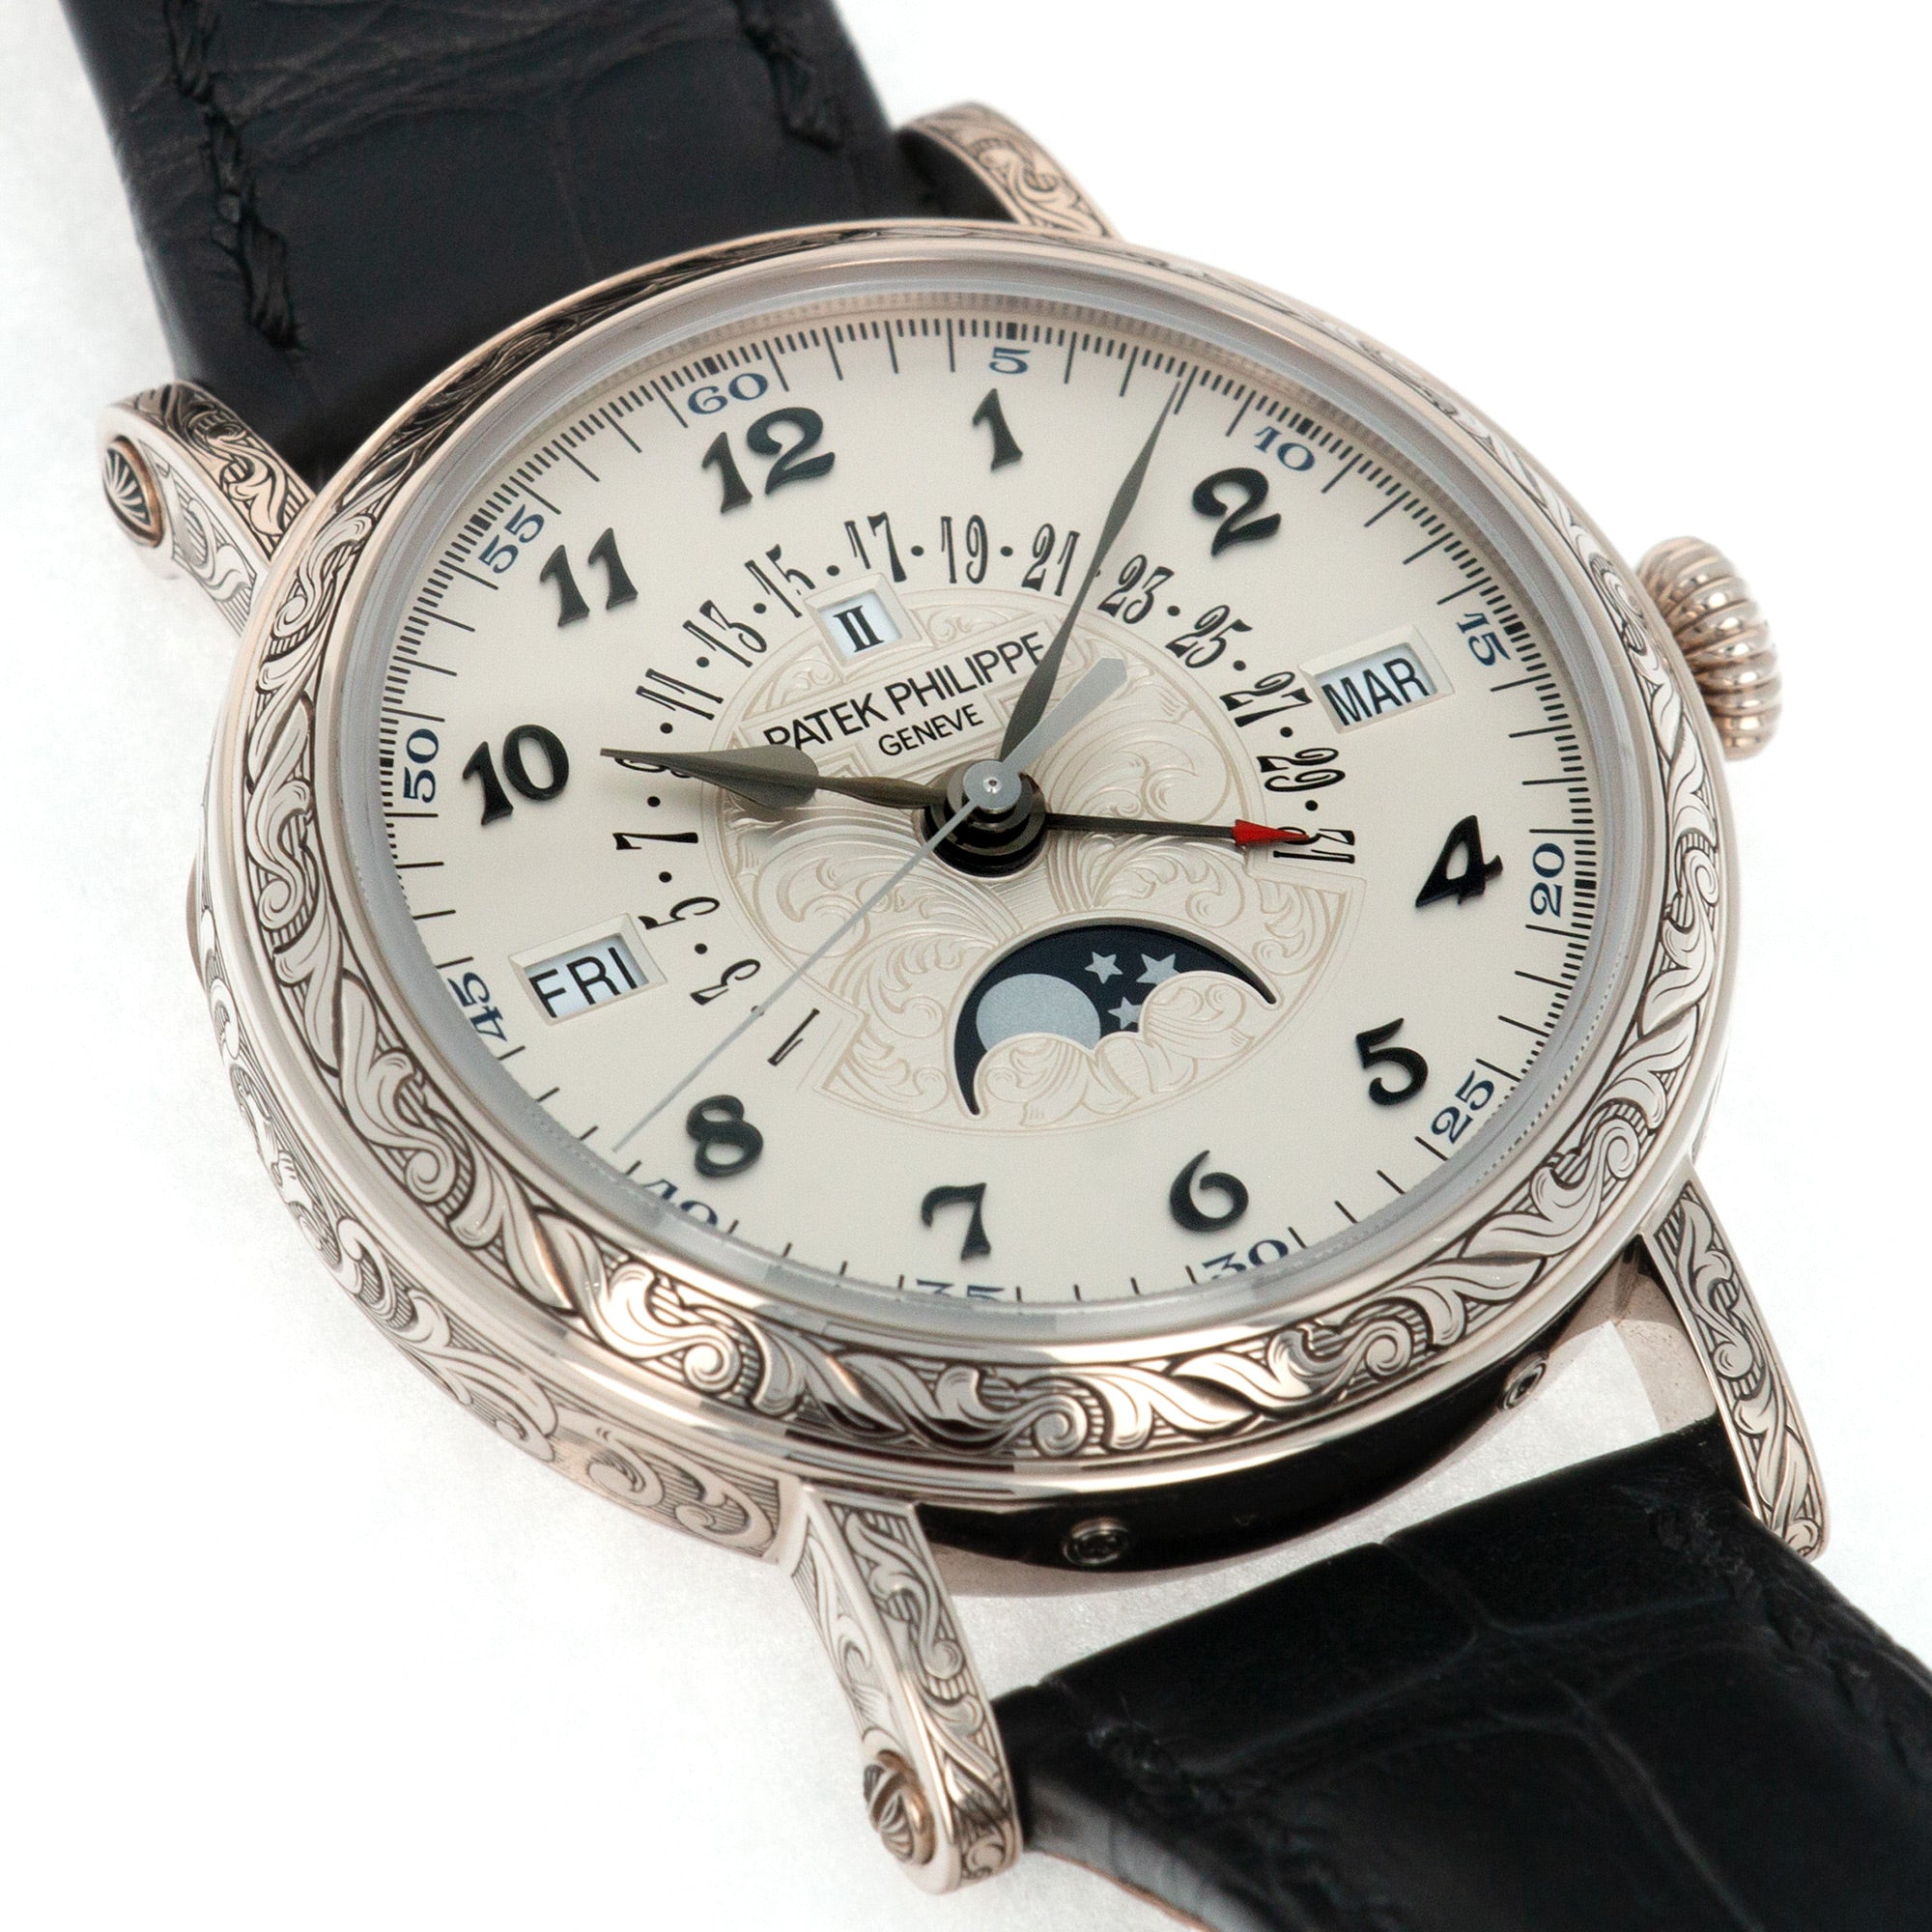 Patek Philippe - Patek Philippe White Gold Perpetual Calendar Watch Ref. 5160, Retailed by Tiffany & Co. - The Keystone Watches